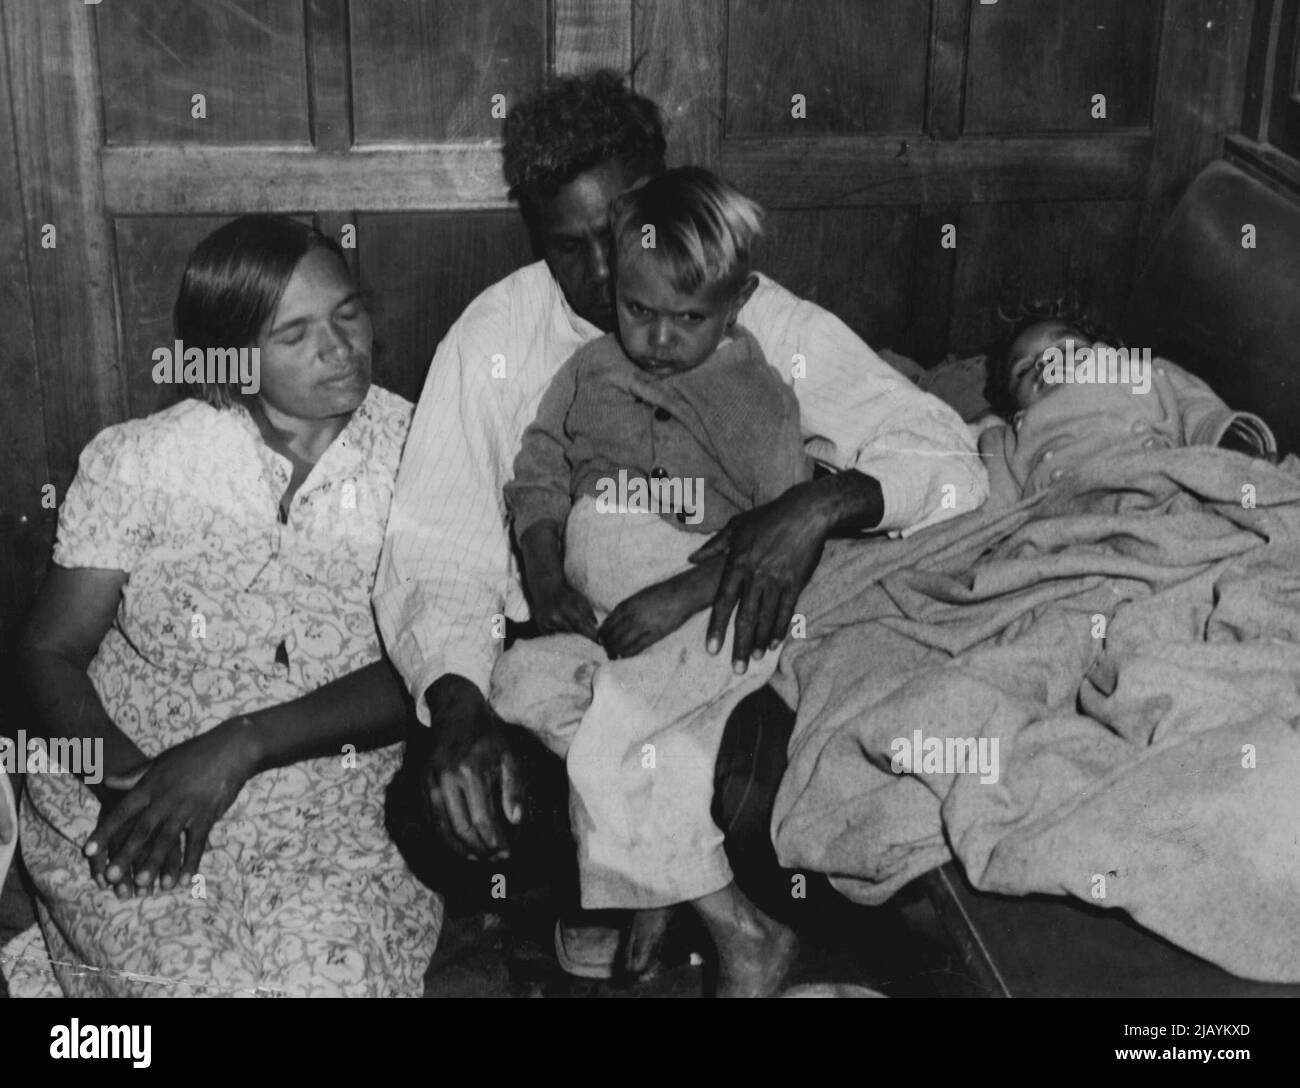 Aboriginal Passengers Are Confined to one second class coach at the rear of the train. They are forbidden to book sleeping berths and are kept out of the dinning car. July 22, 1954. Stock Photo